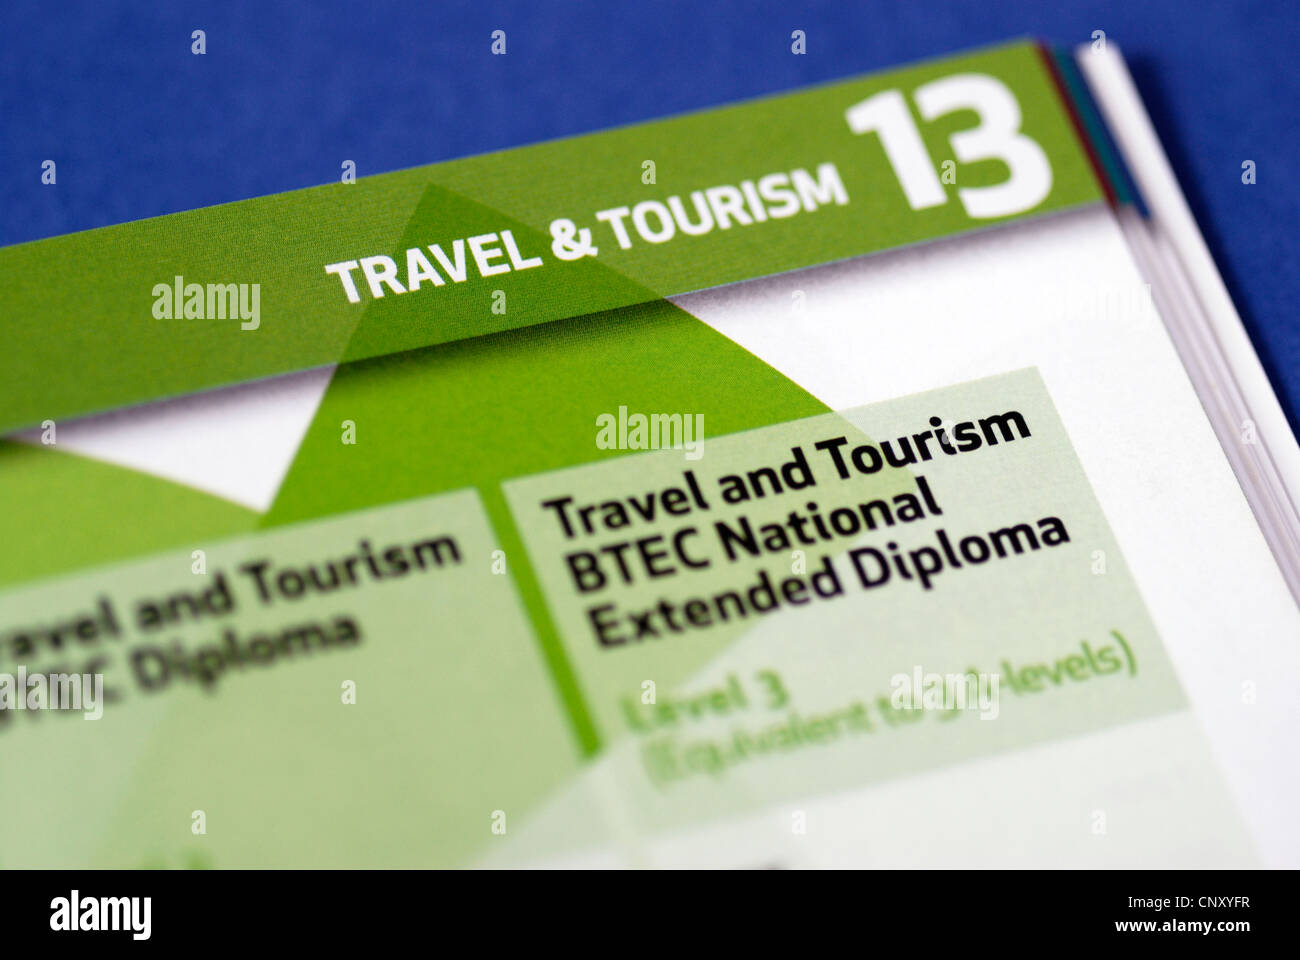 Travel and tourism section of a college course guide Stock Photo